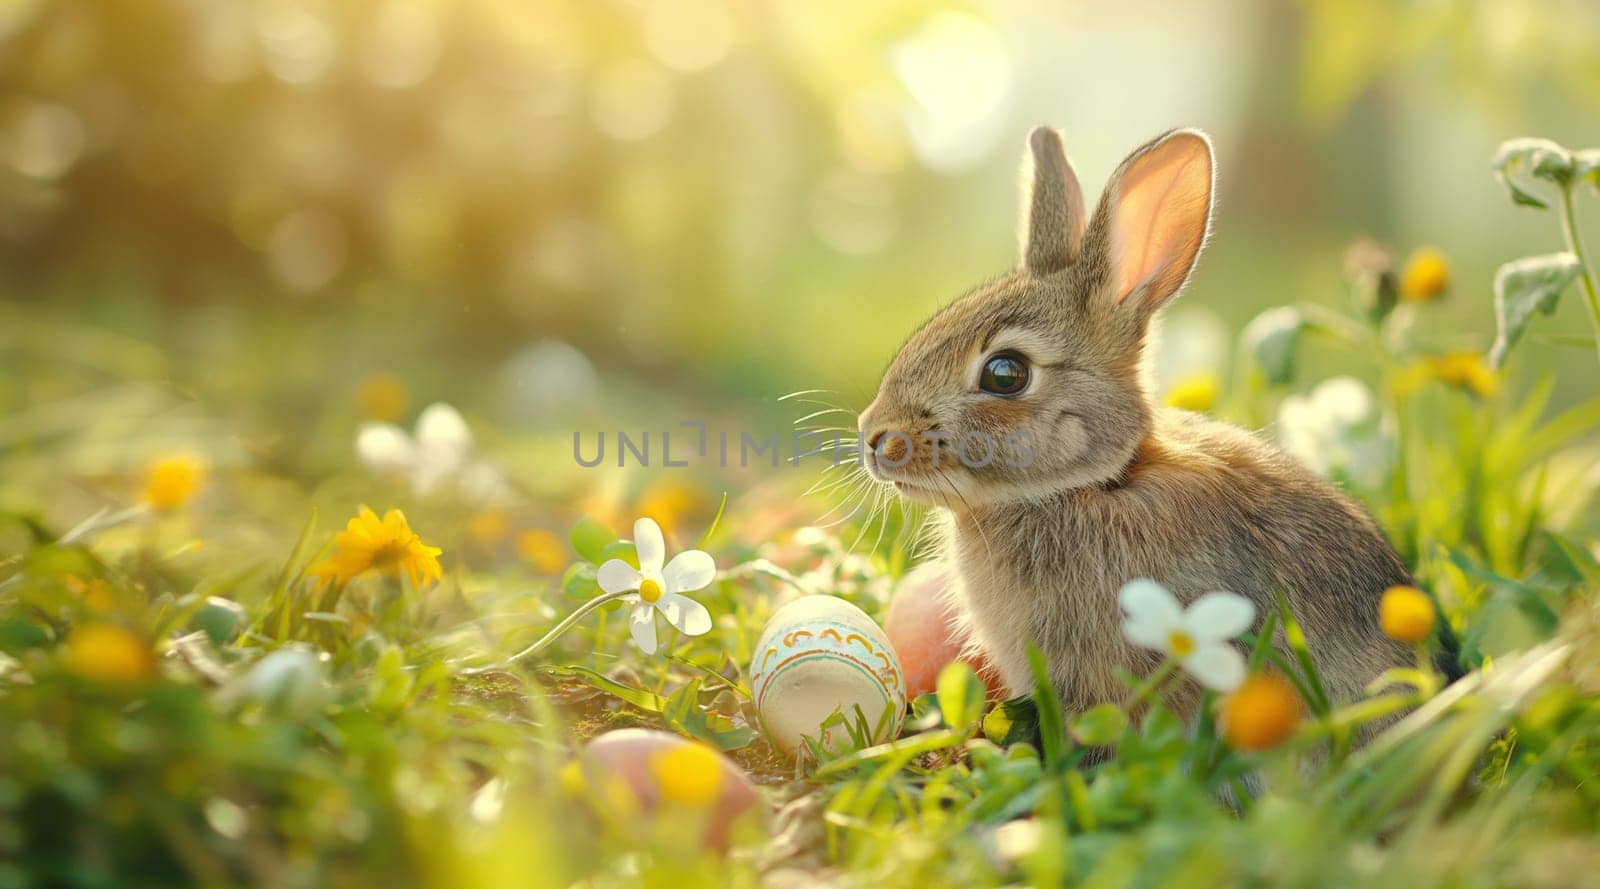 A bunny among flowers and Easter eggs in the sunlight. High quality photo